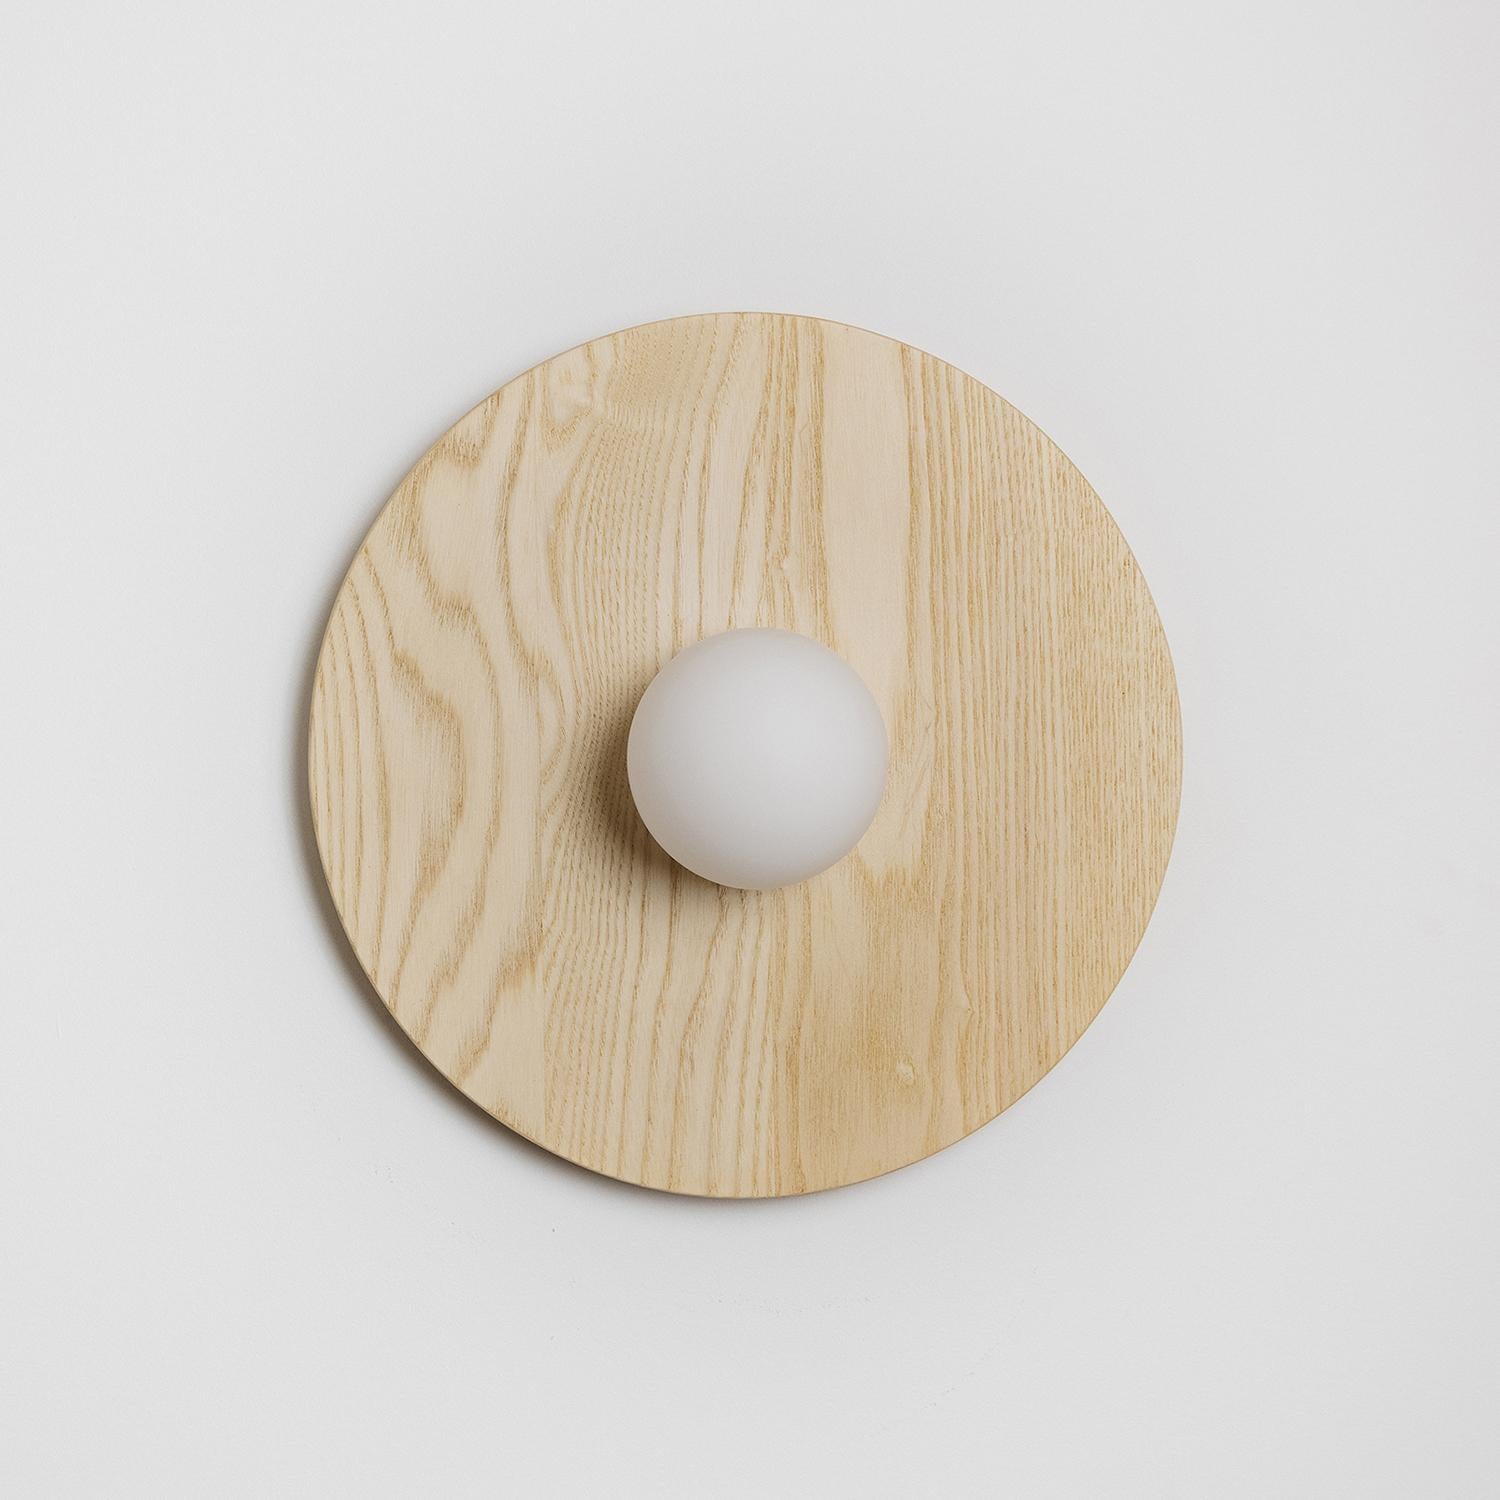 The Tablet series consists of multiple wood backing plates that showcase the glass globe as it sinks into the wood behind it. This series is available in various finishes.

This fixture can be used as a wall mount or flush mount.

Our light